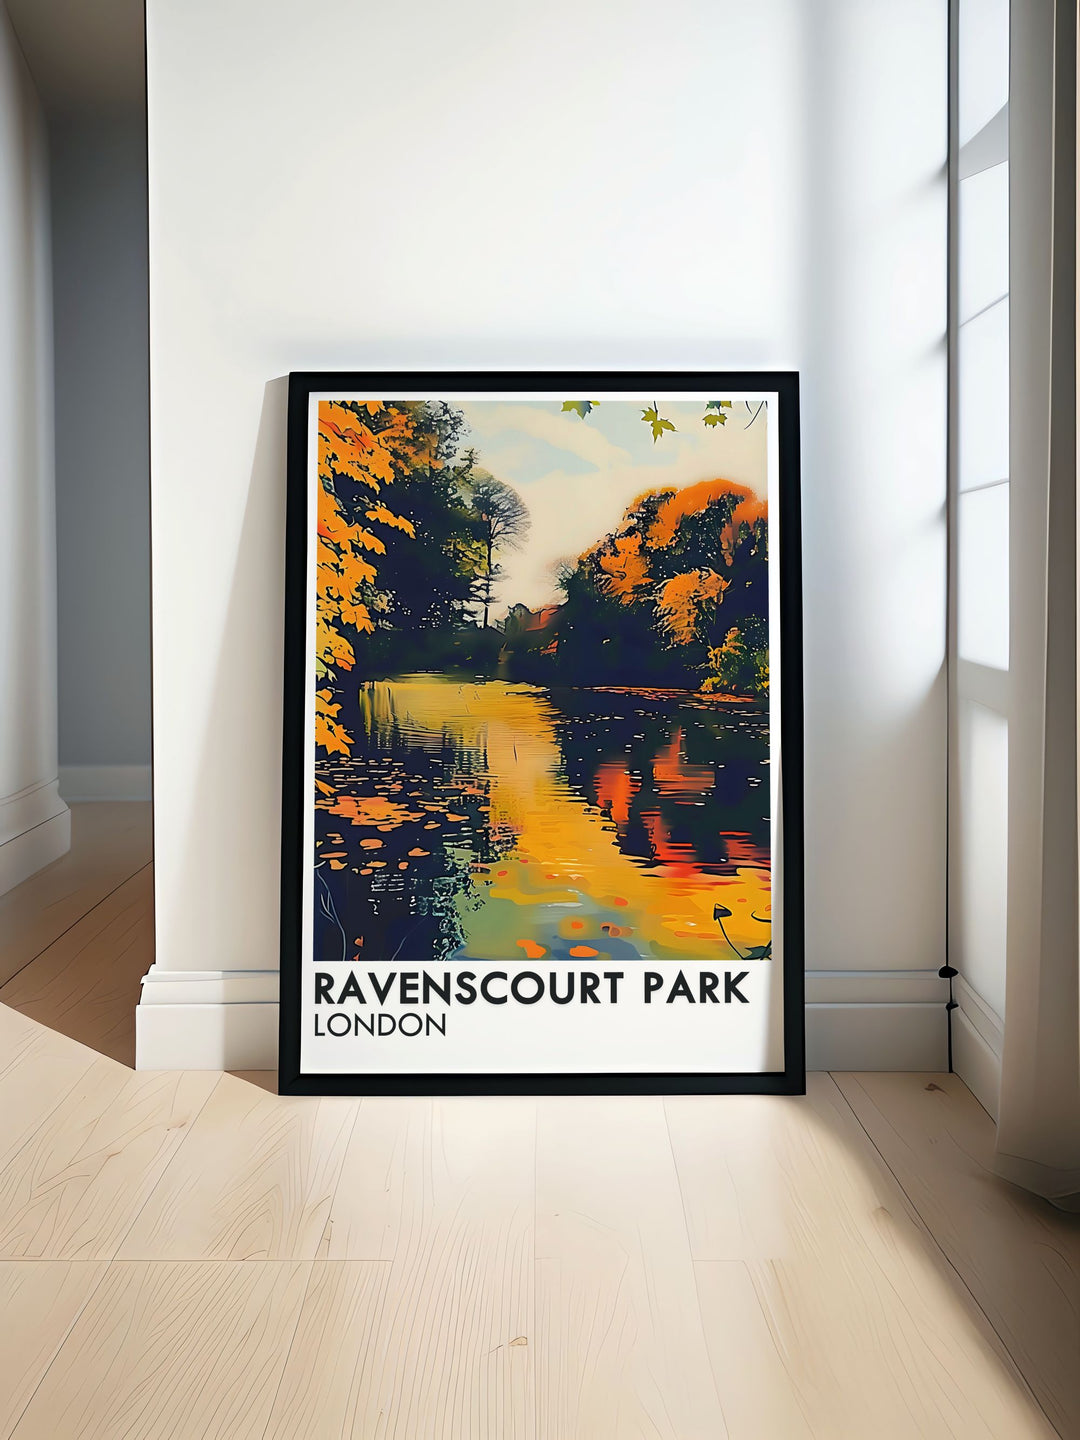 Ravenscourt Park Lake London Travel Poster showcasing the serene lake with lush greenery and historic trees. Ideal for adding a touch of tranquility to any space, this poster highlights the peaceful beauty of one of West Londons cherished parks.